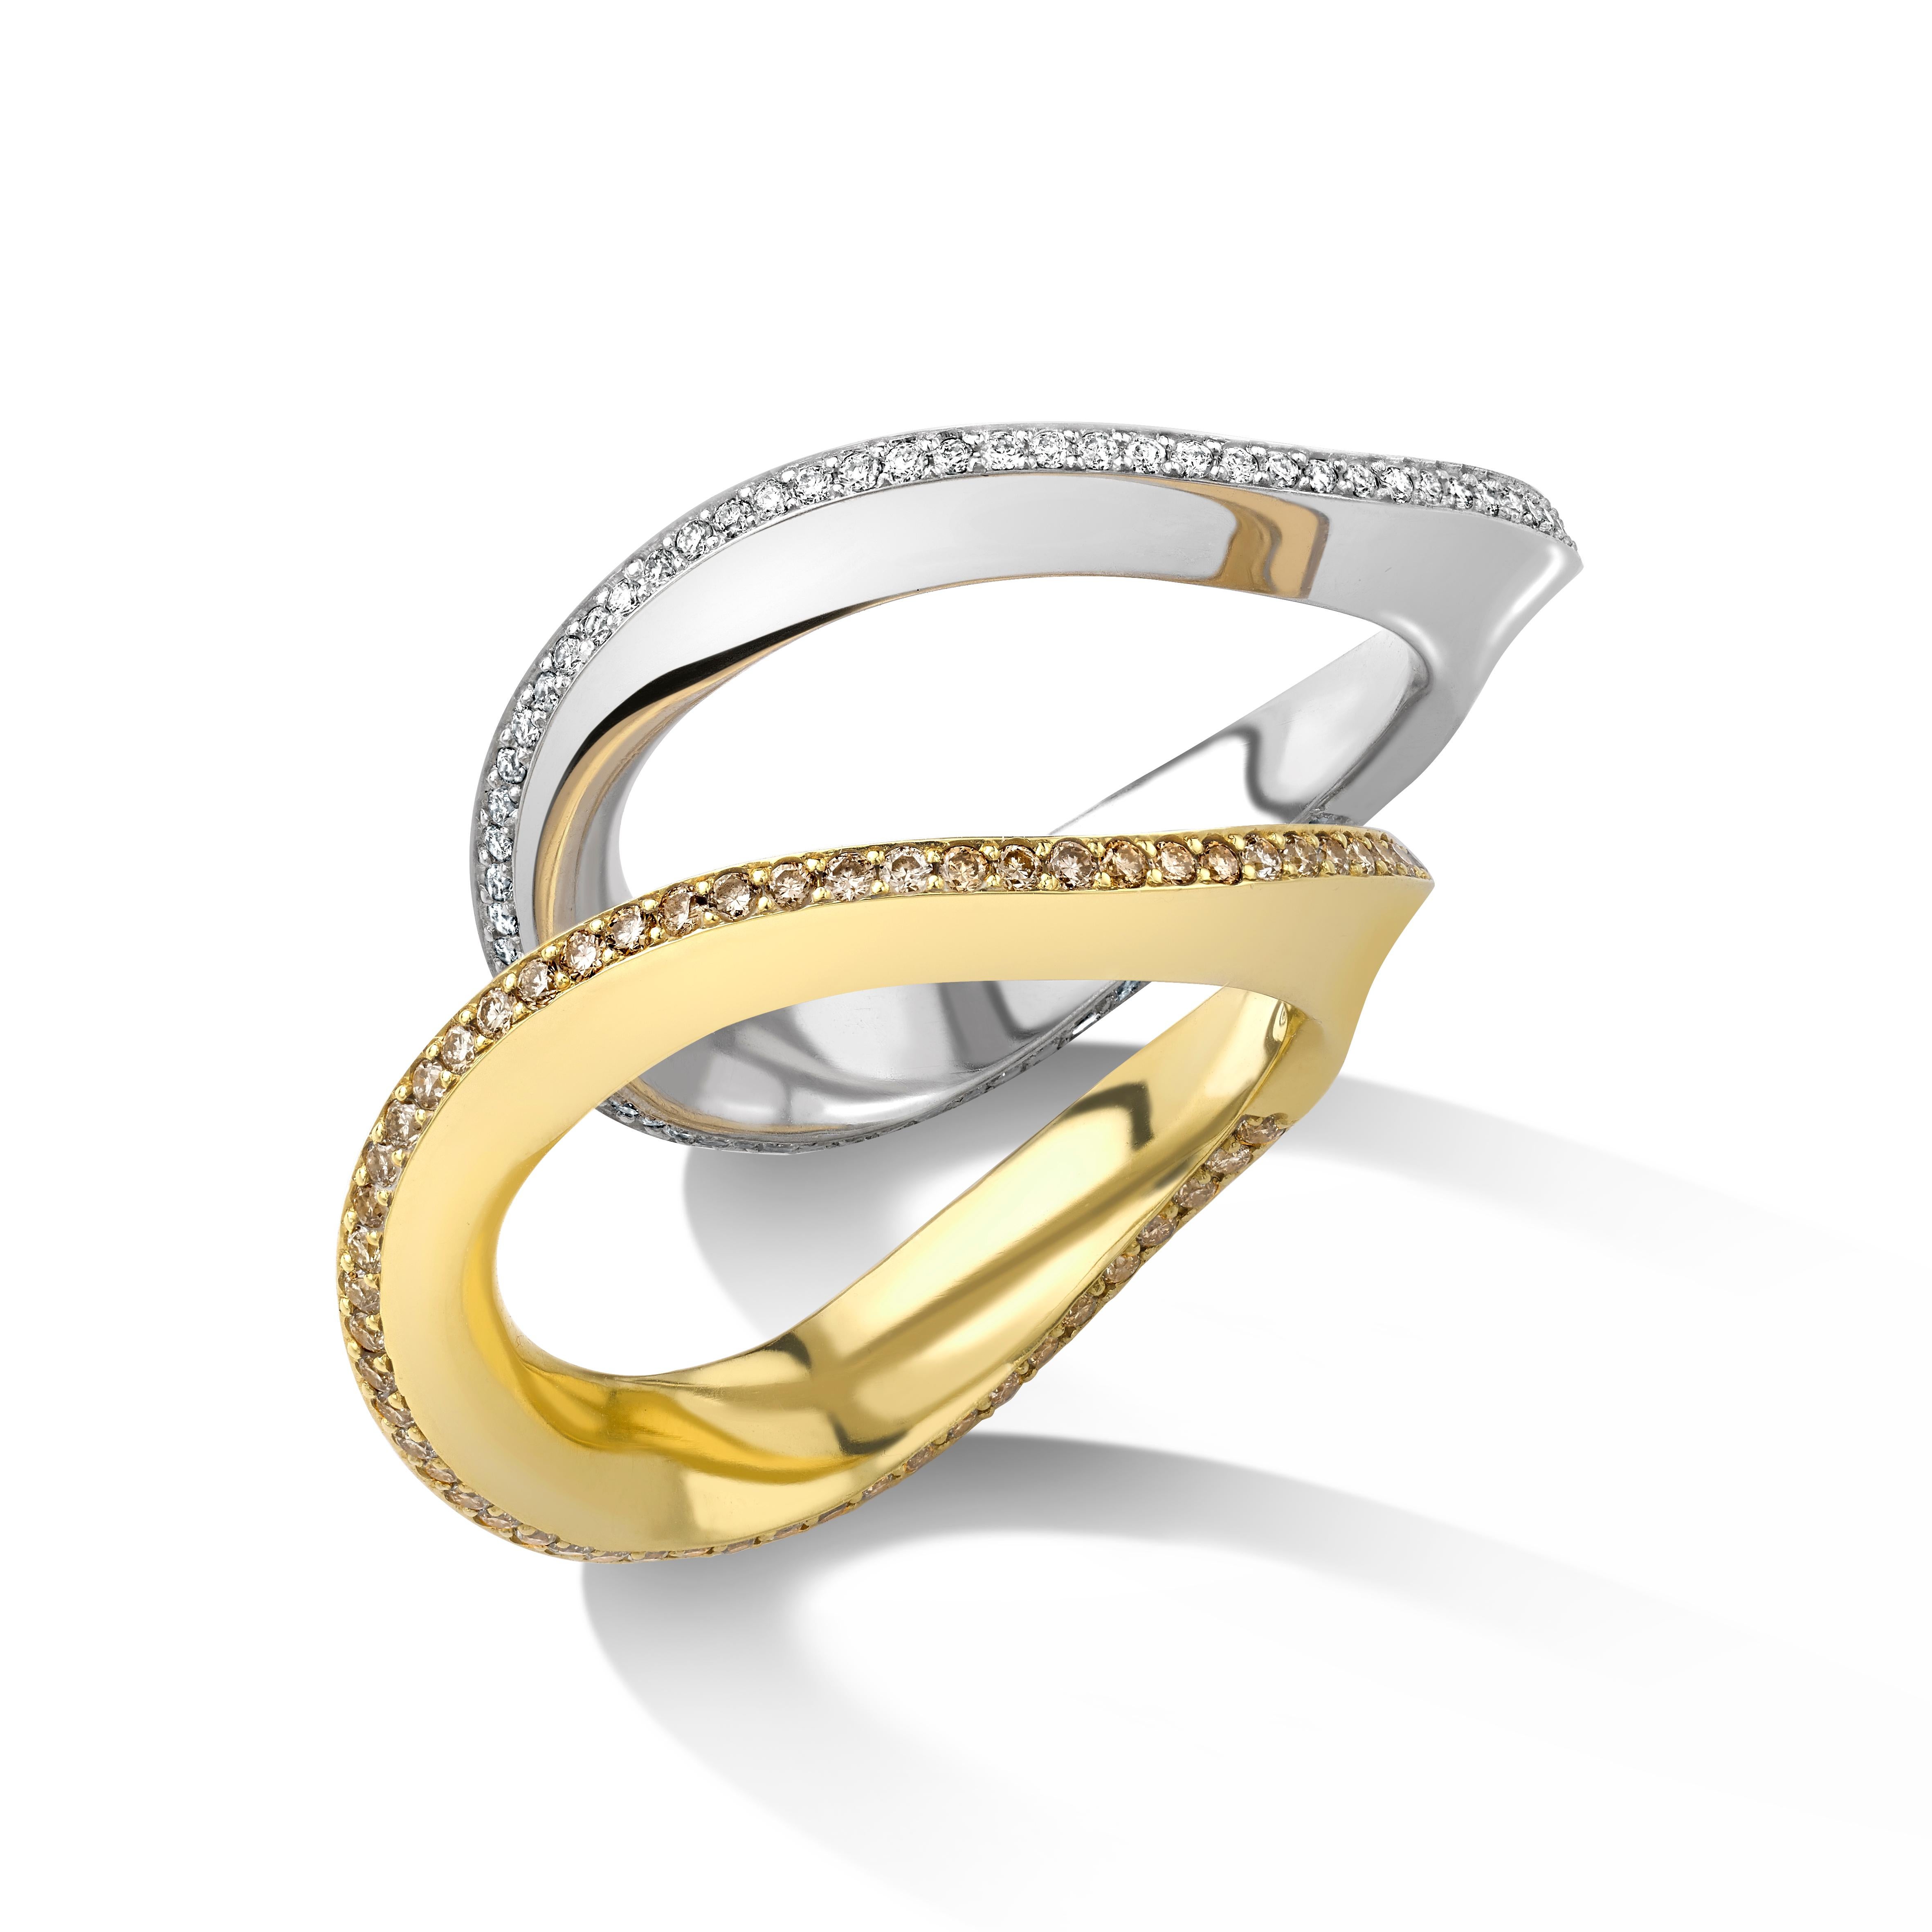 For Sale:   SCHIUMA RING Yellow gold with a warm-tone diamond edge by Liv Luttrell 2